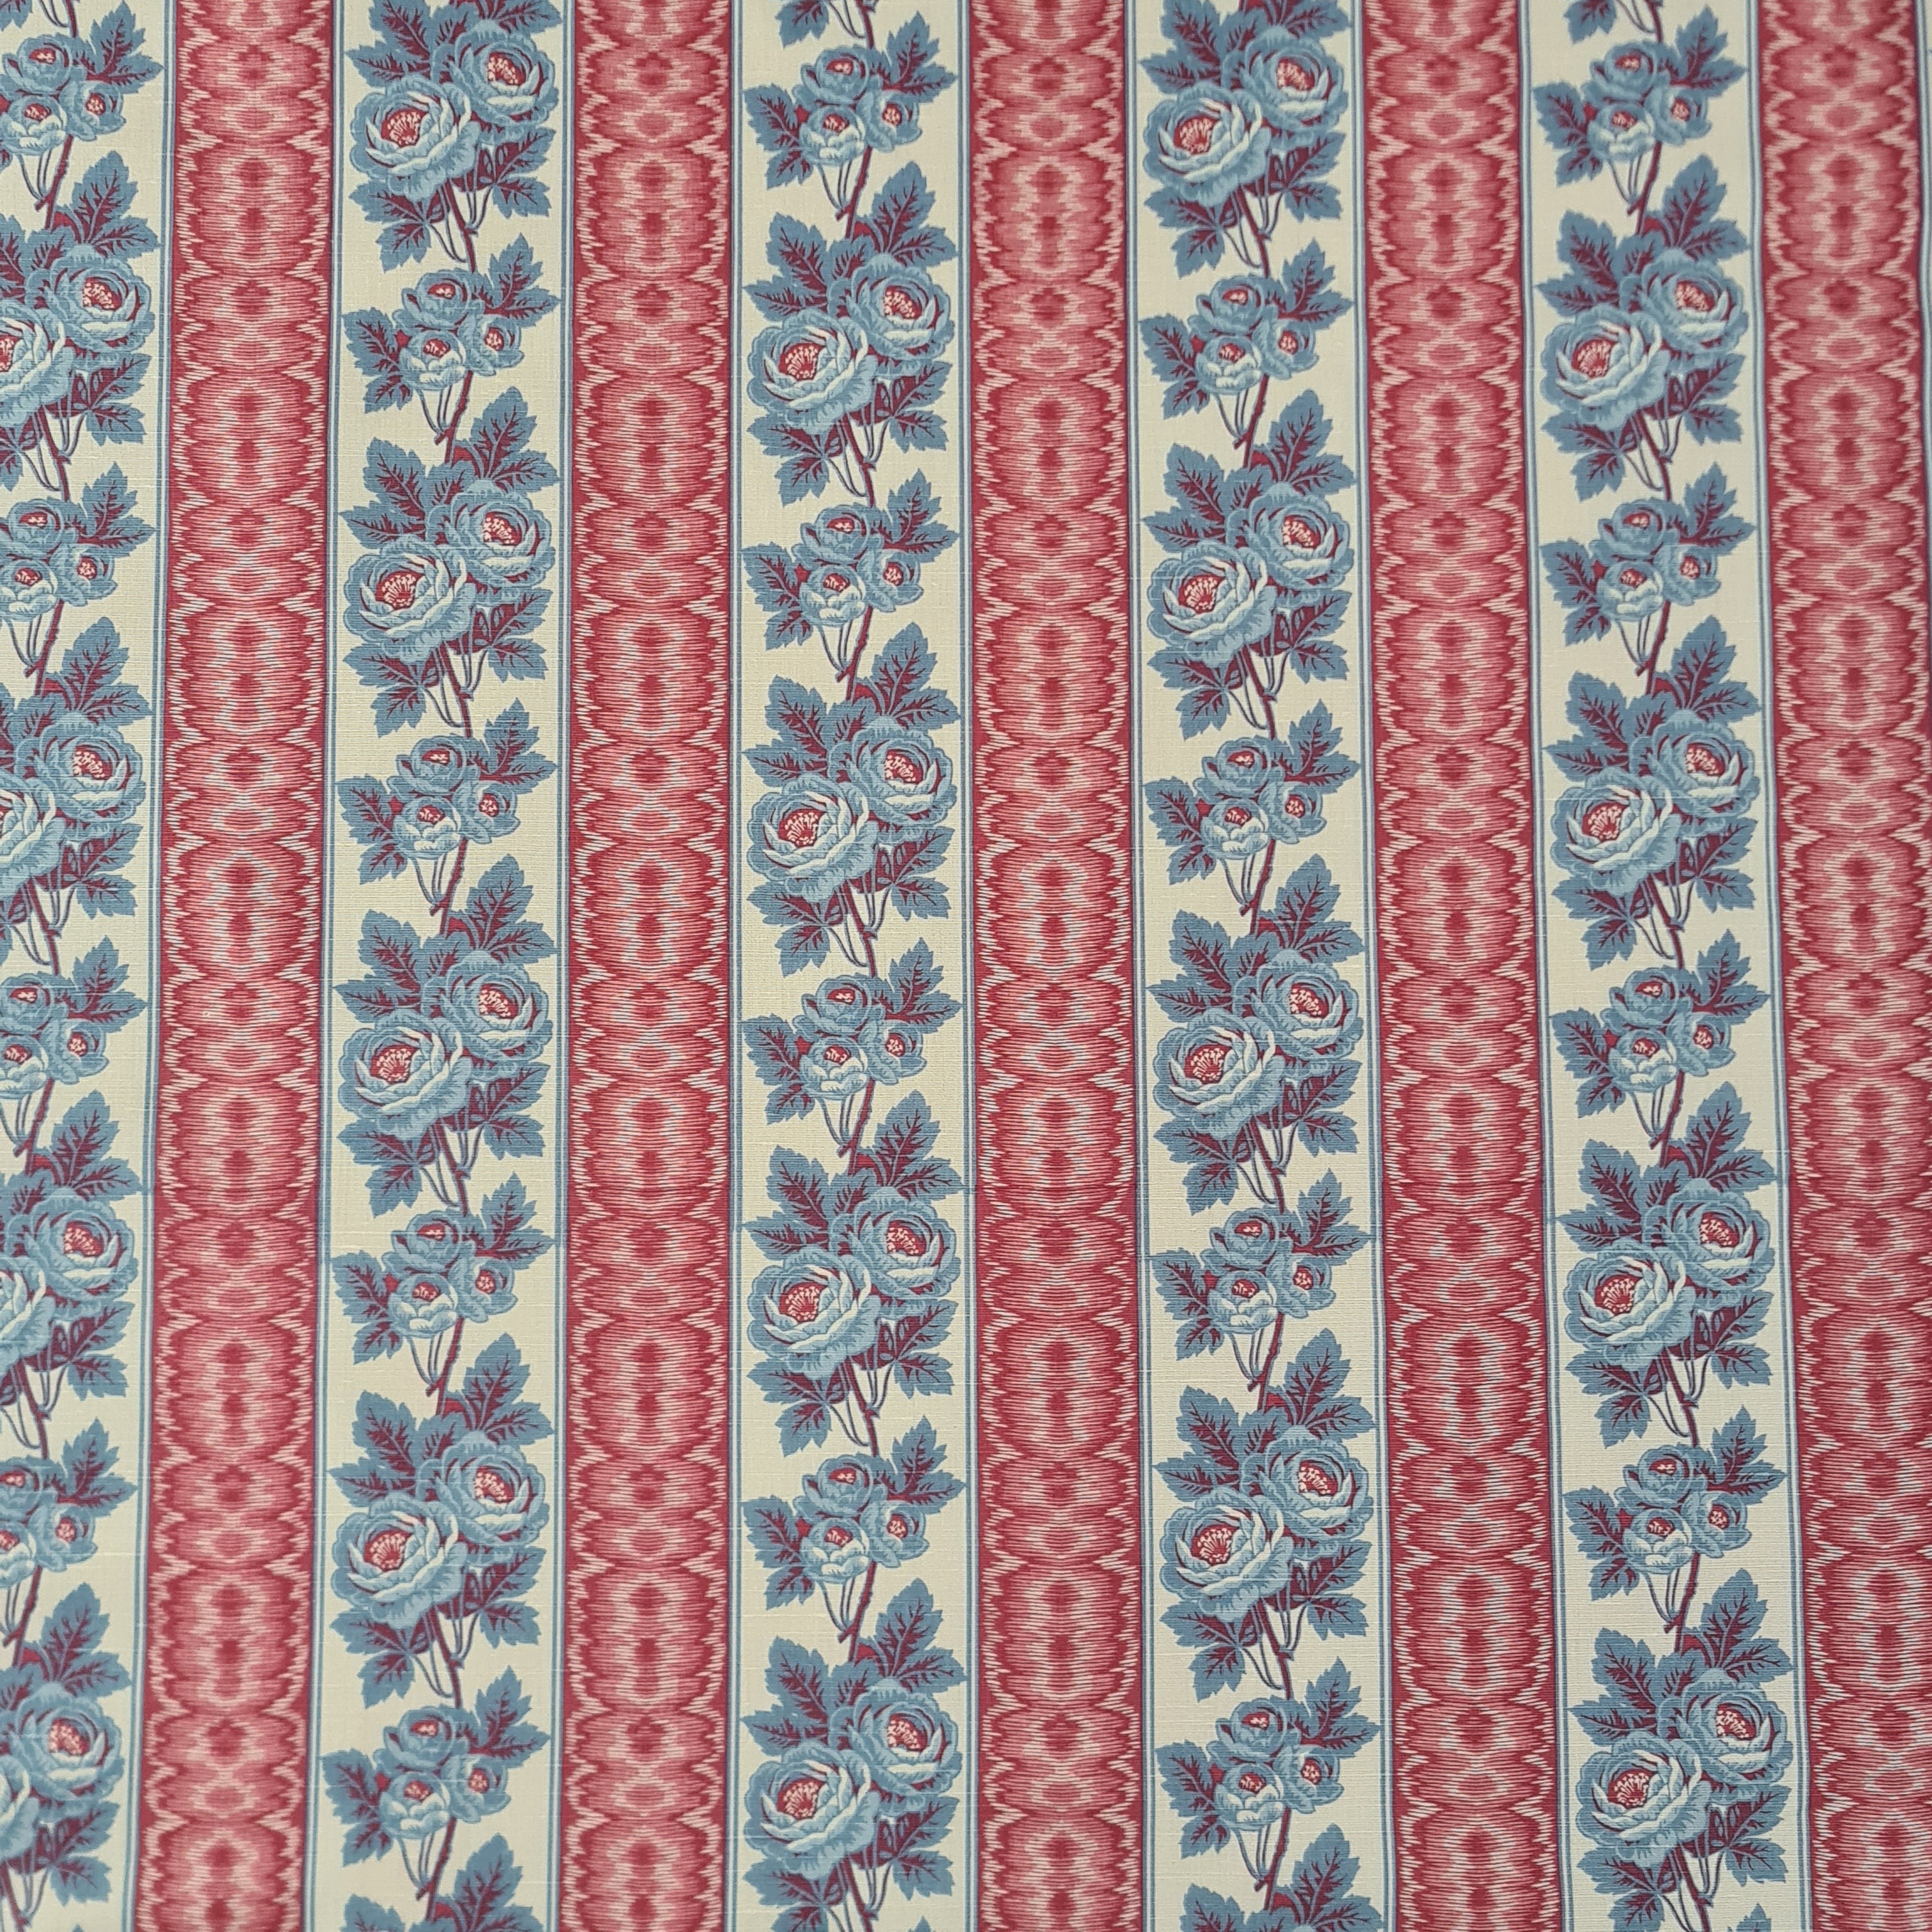 Jean Monro, Radclyffe Stripe - Haines Collection, Fabric – Haines